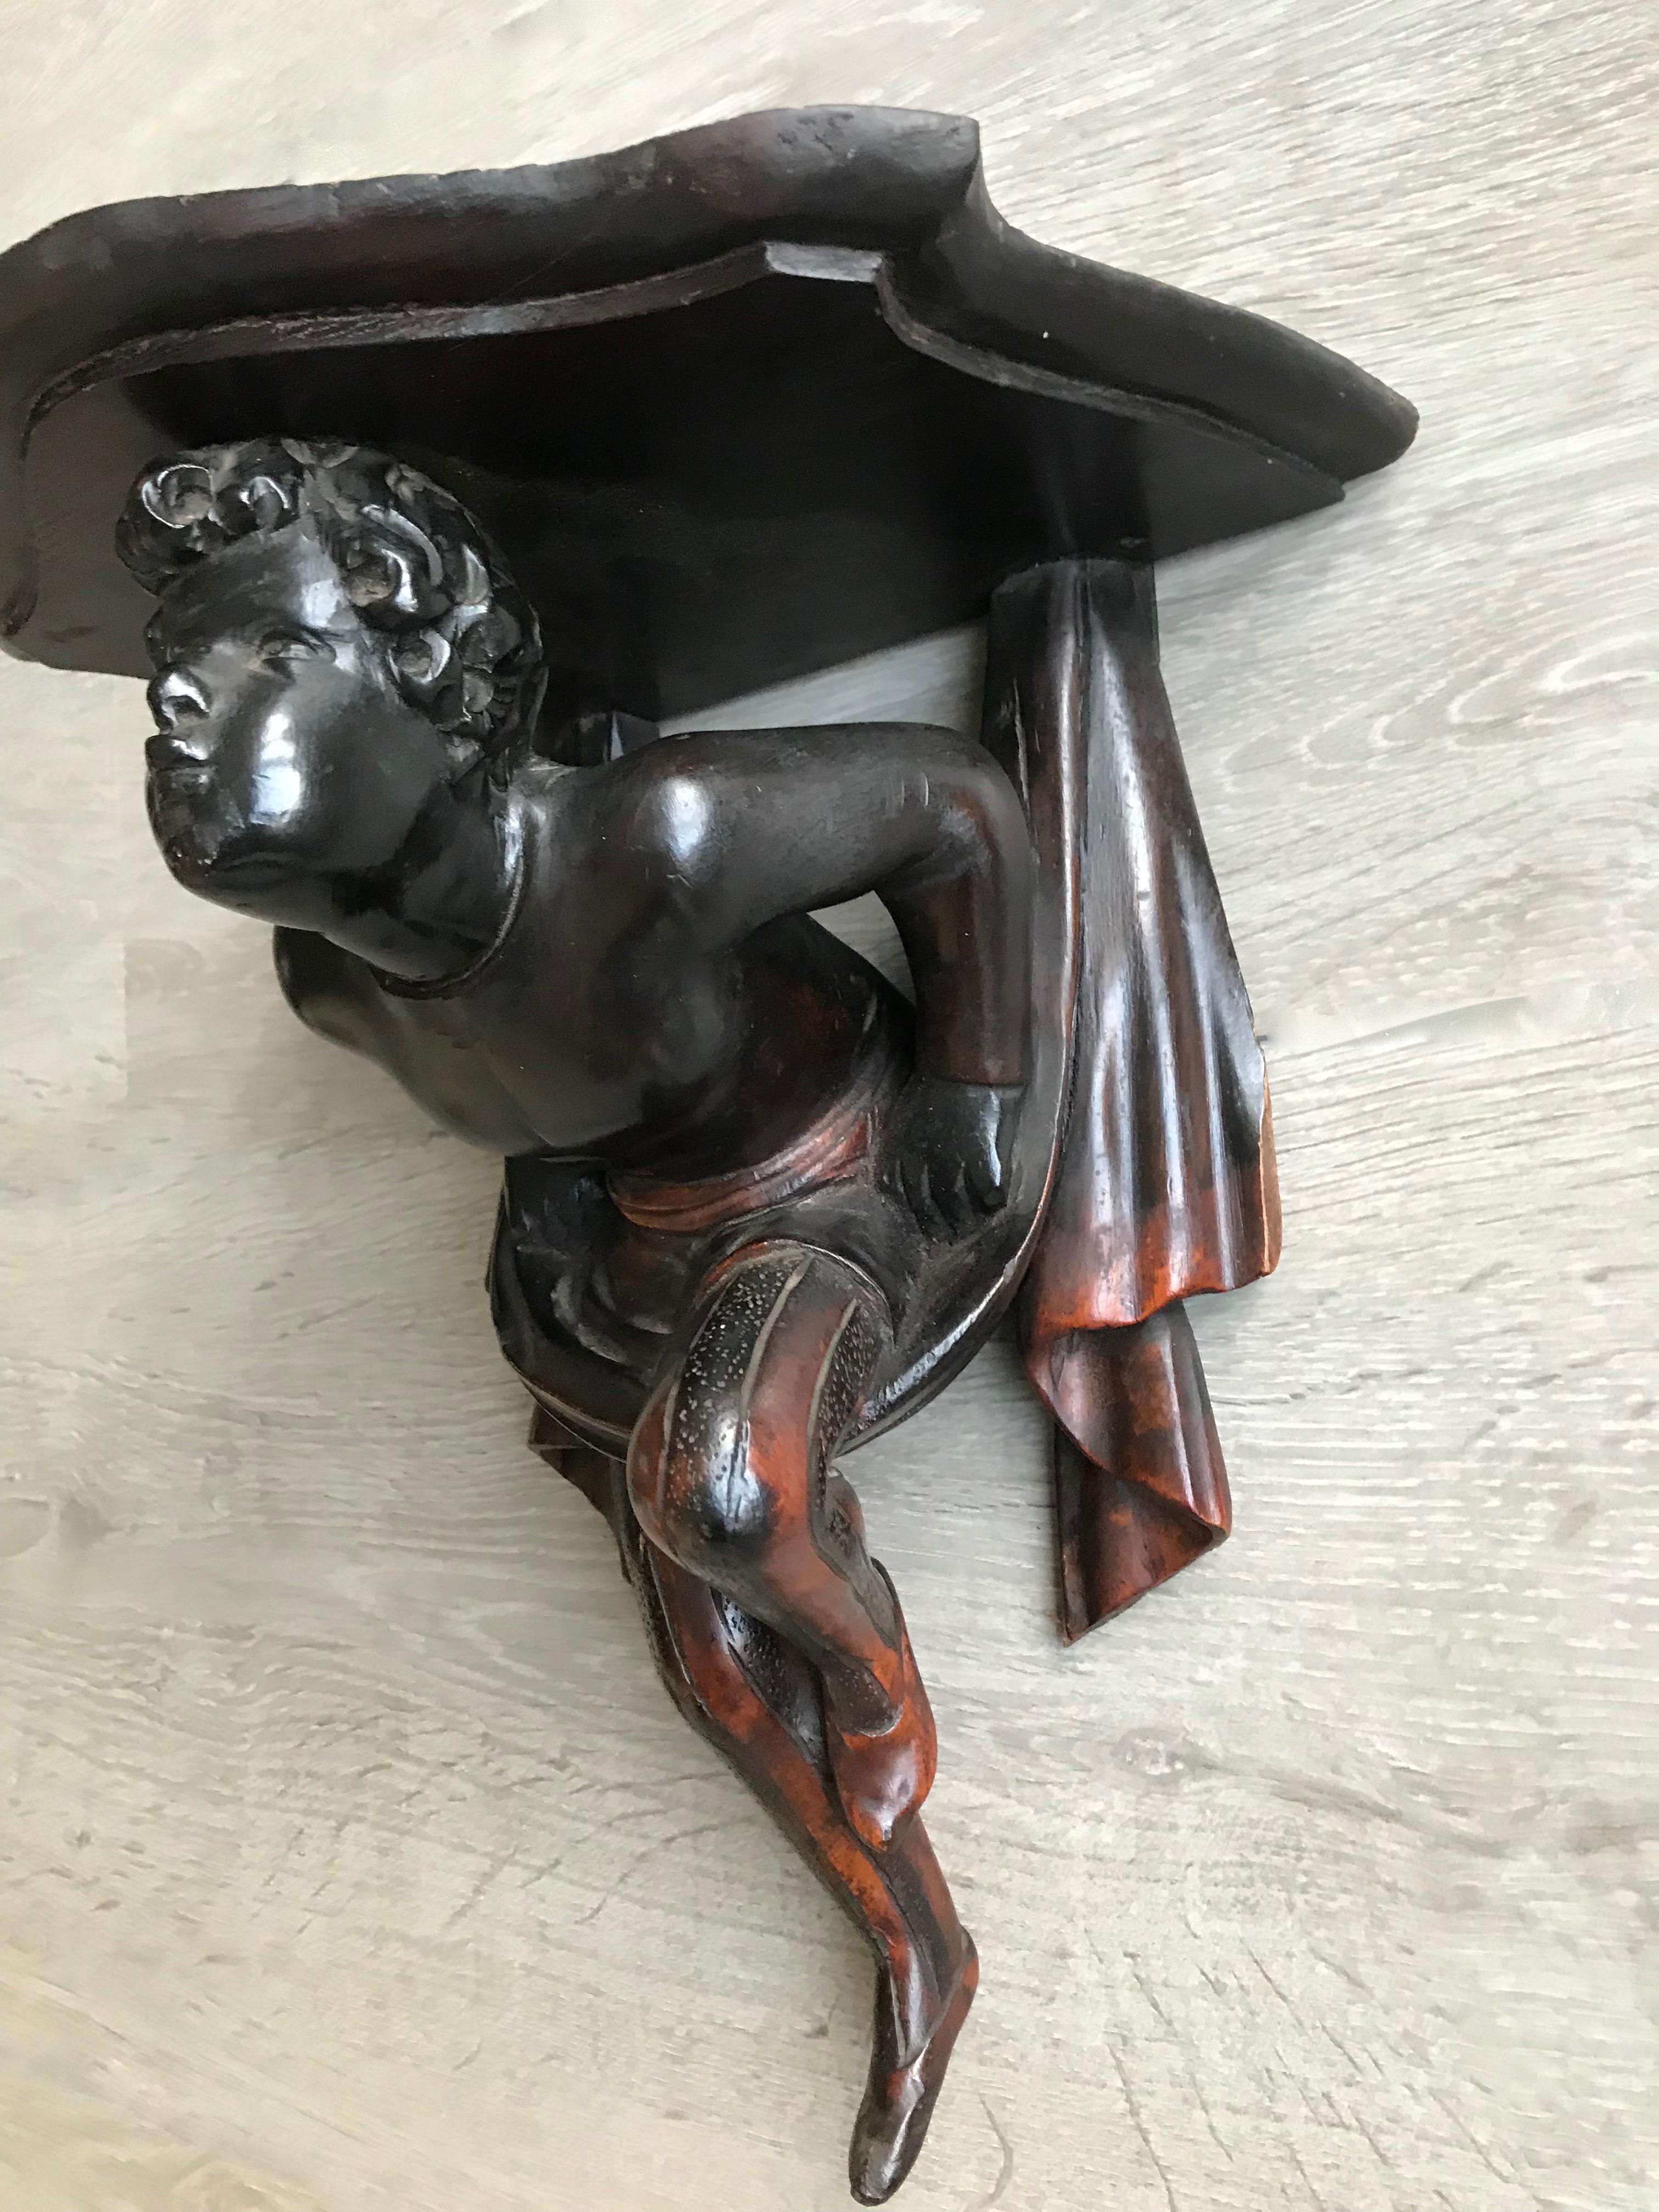 All handcrafted and great looking Italian antique.

This Italian made wall bracket is a Fine example of the Venetian craftsmanship from the late 19th century. We all know the grand history of Italian painting, sculpting and master wood carving and